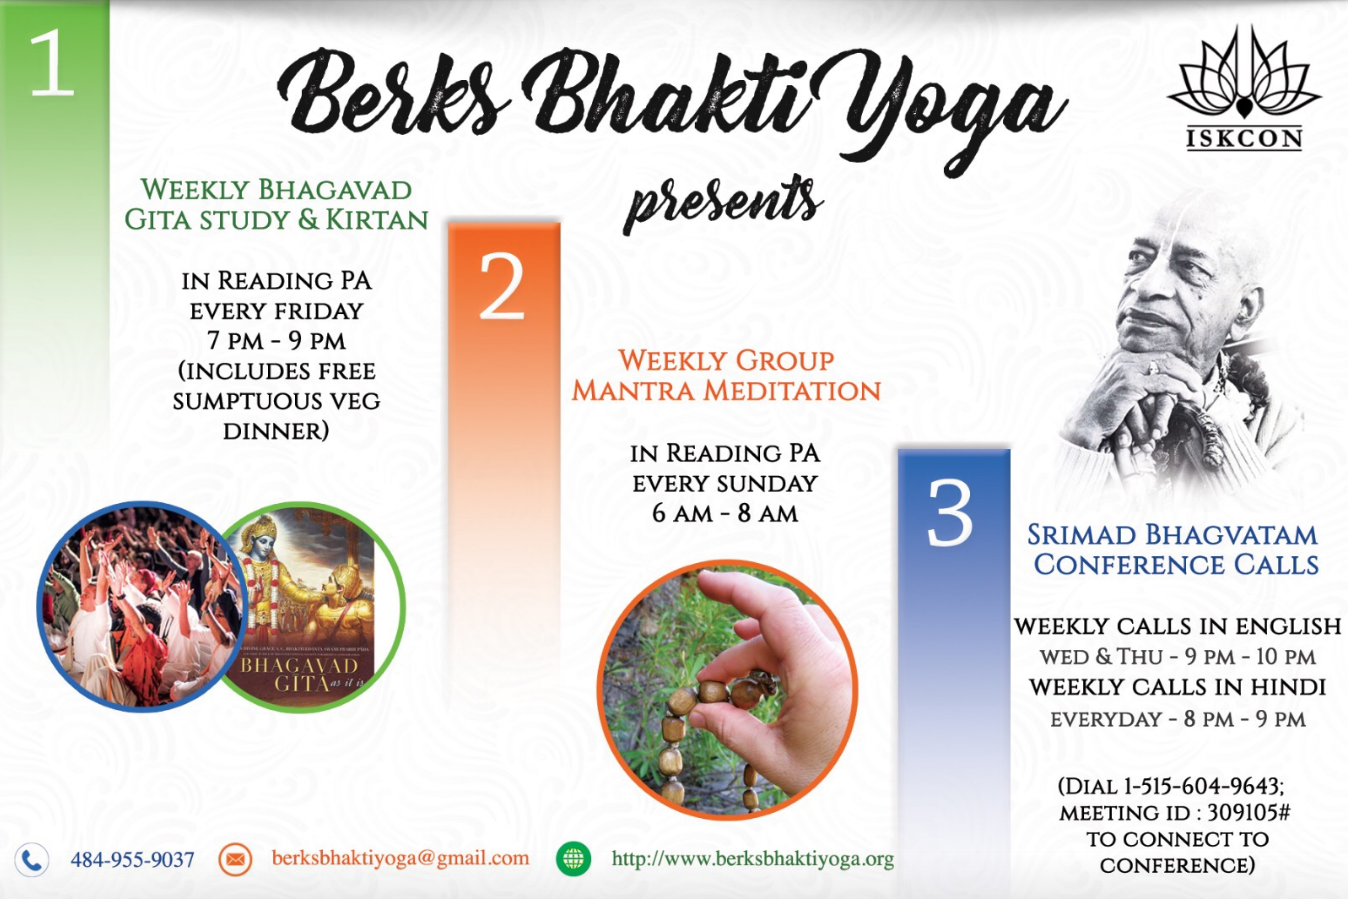 Come and Experience the Bliss and Nectar of Bhakti Yoga - Kirtan, Bhagvat Gita Study, Mantra Meditation, Prayers in Reading - Friday's @7:00pm @ Please Register (free) for Details